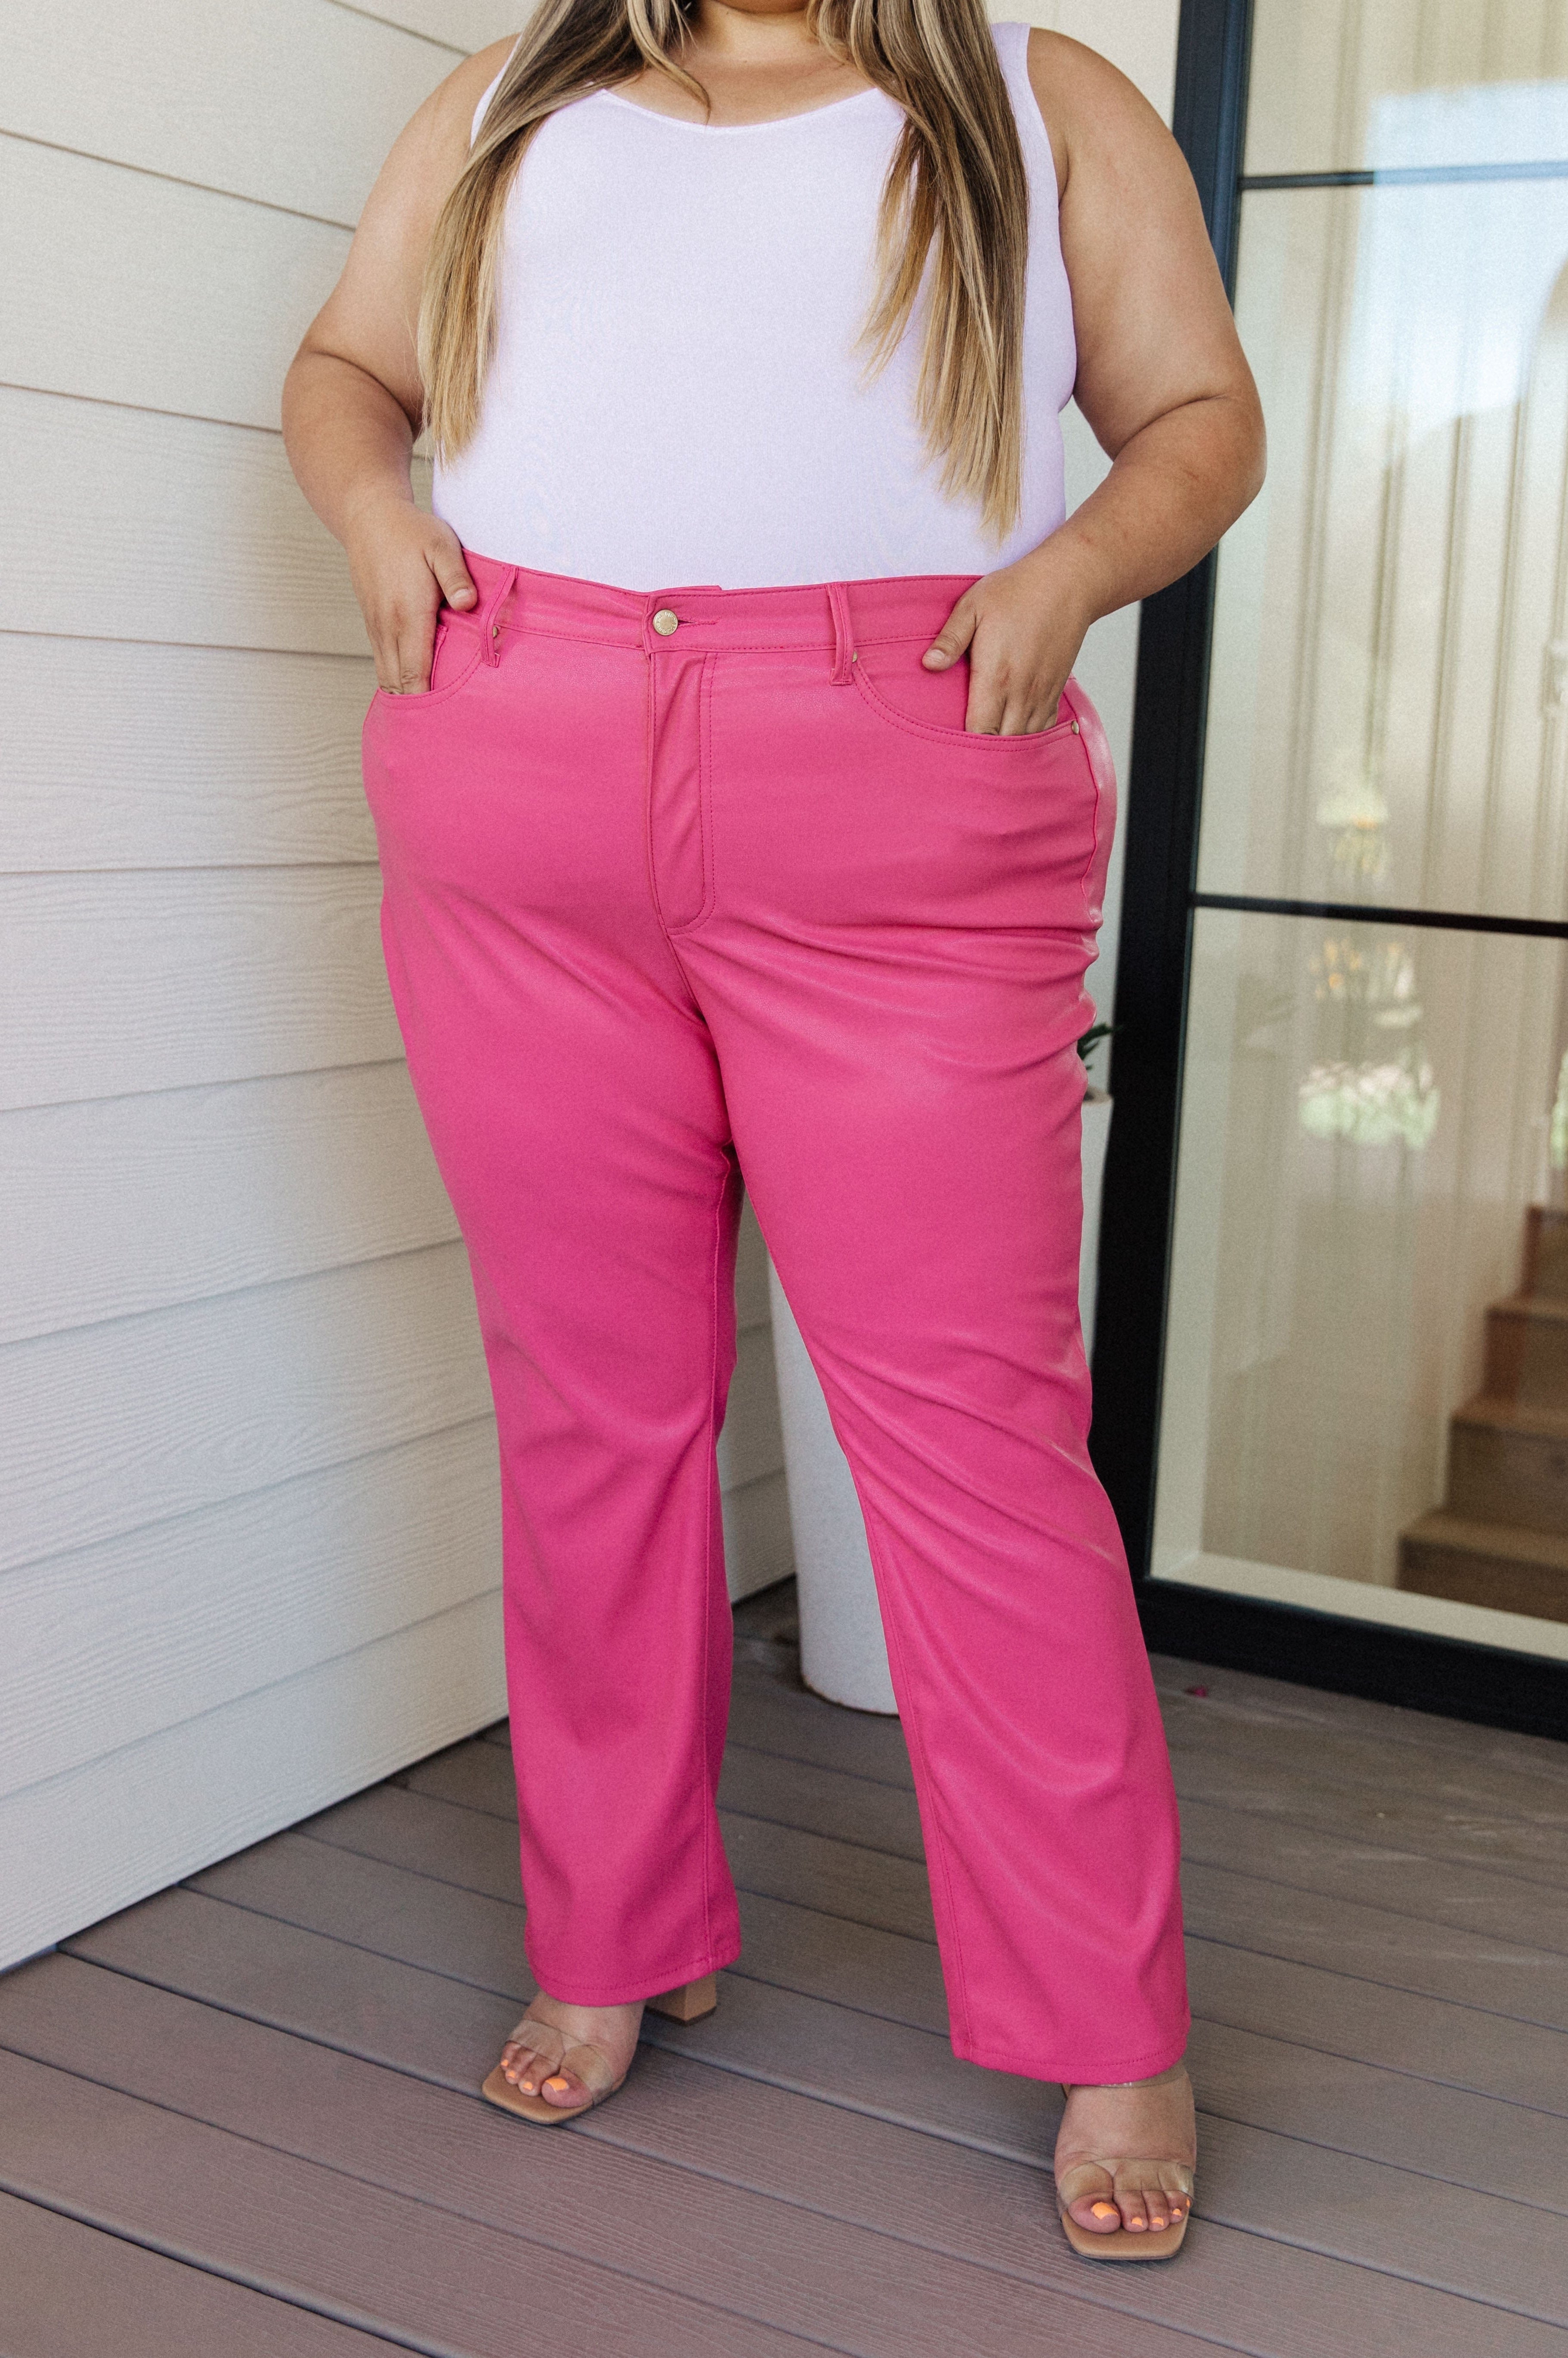 Tanya Control Top Faux Leather Pants in Hot Pink-Womens-Stay Foxy Boutique, Florissant, Missouri